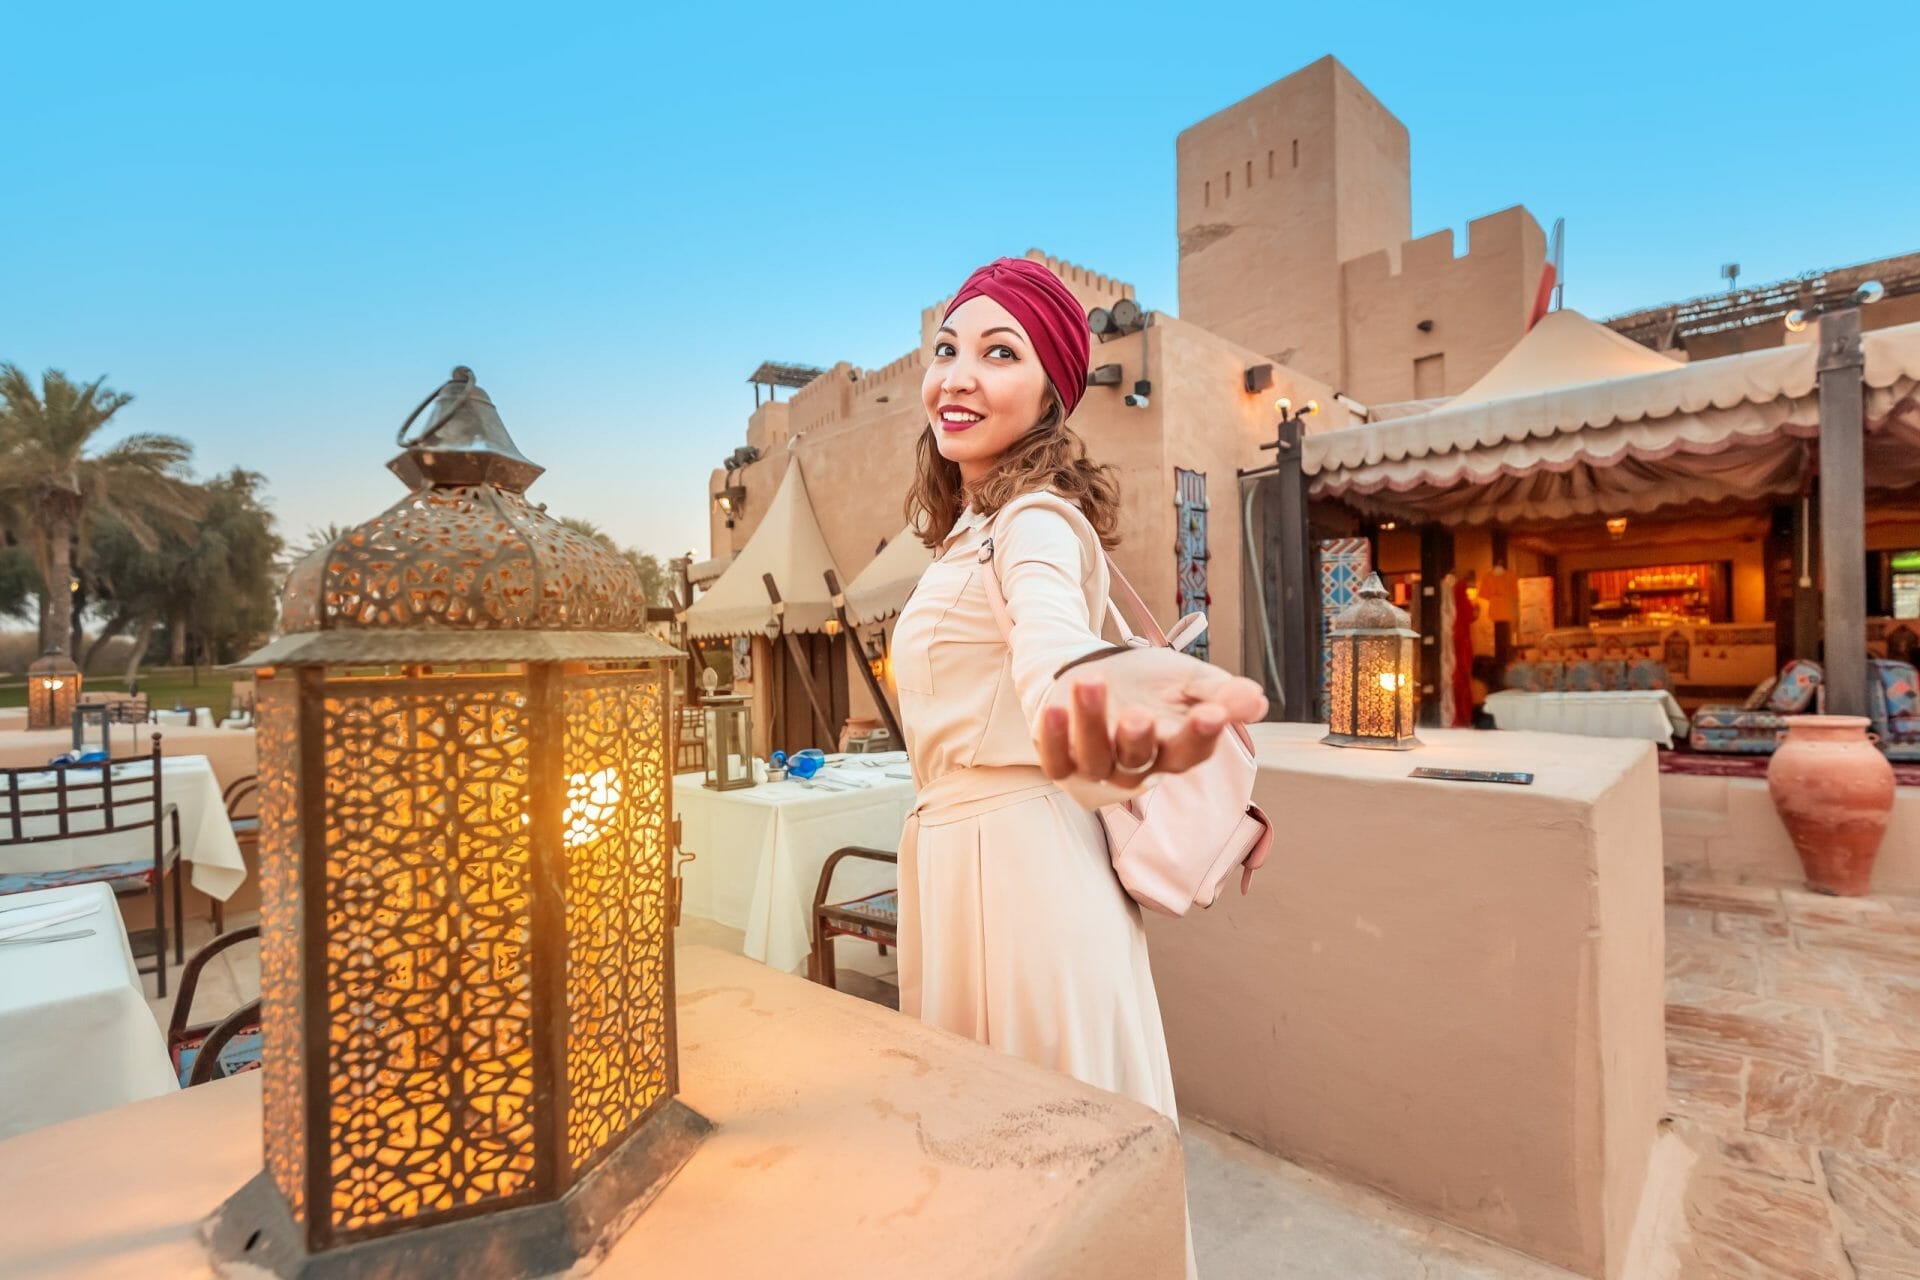 Follow happy woman traveler wearing dress and turban walking through the streets of an old Arab town or village in the middle of the desert. Concept of tourism and adventure alone